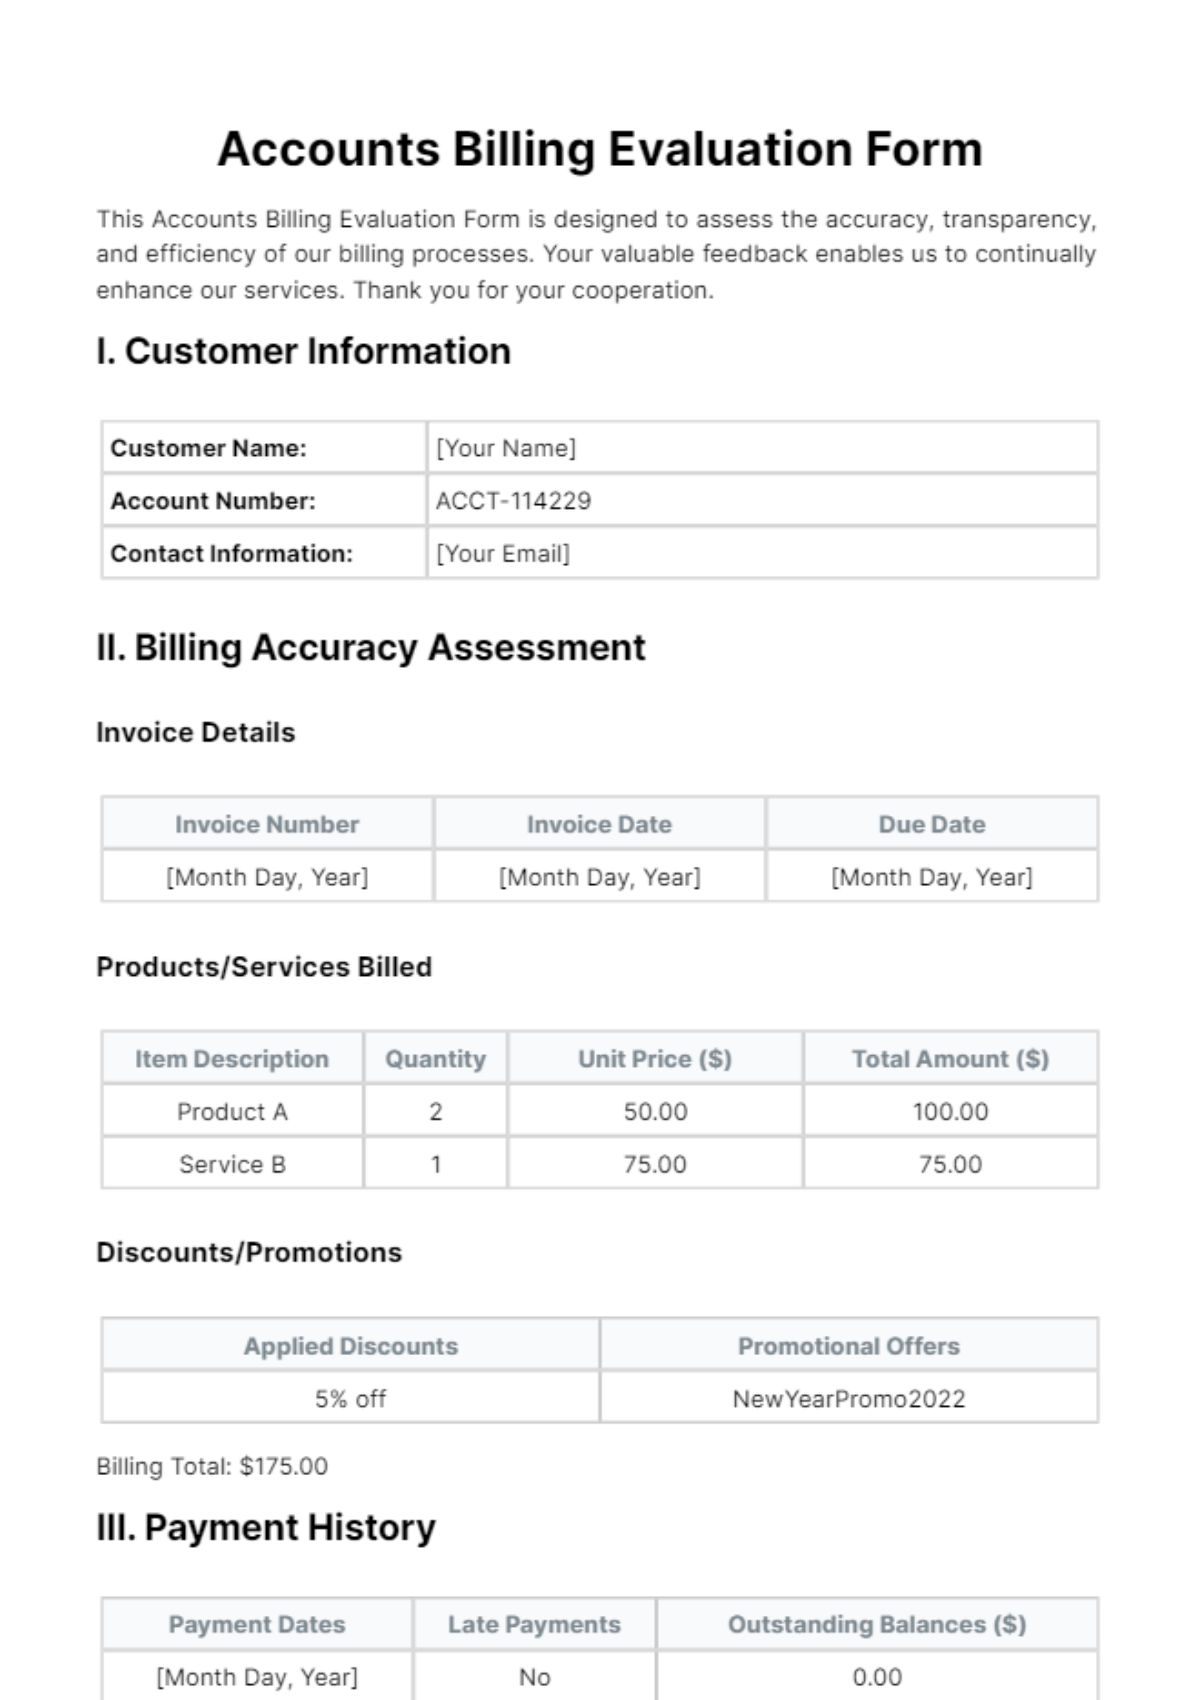 Accounts Billing Evaluation Form Template